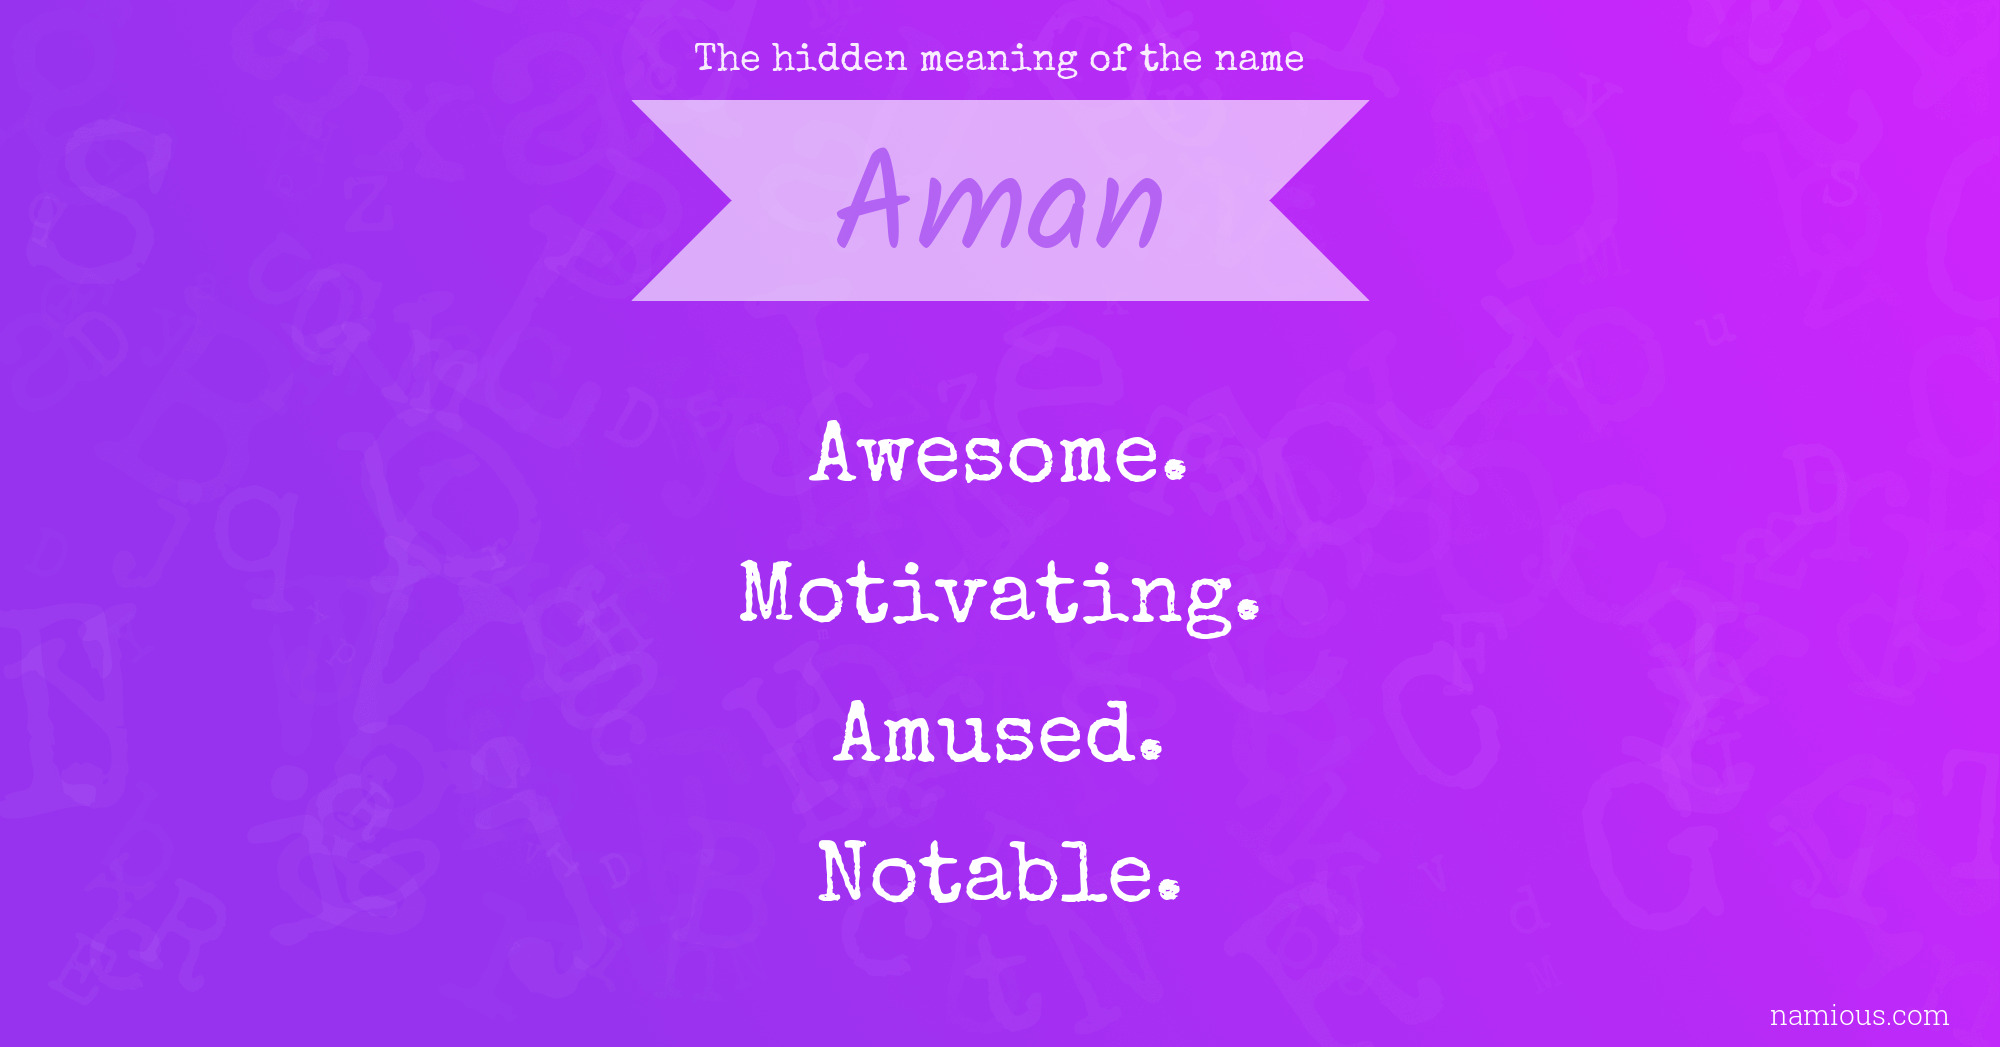 The hidden meaning of the name Aman